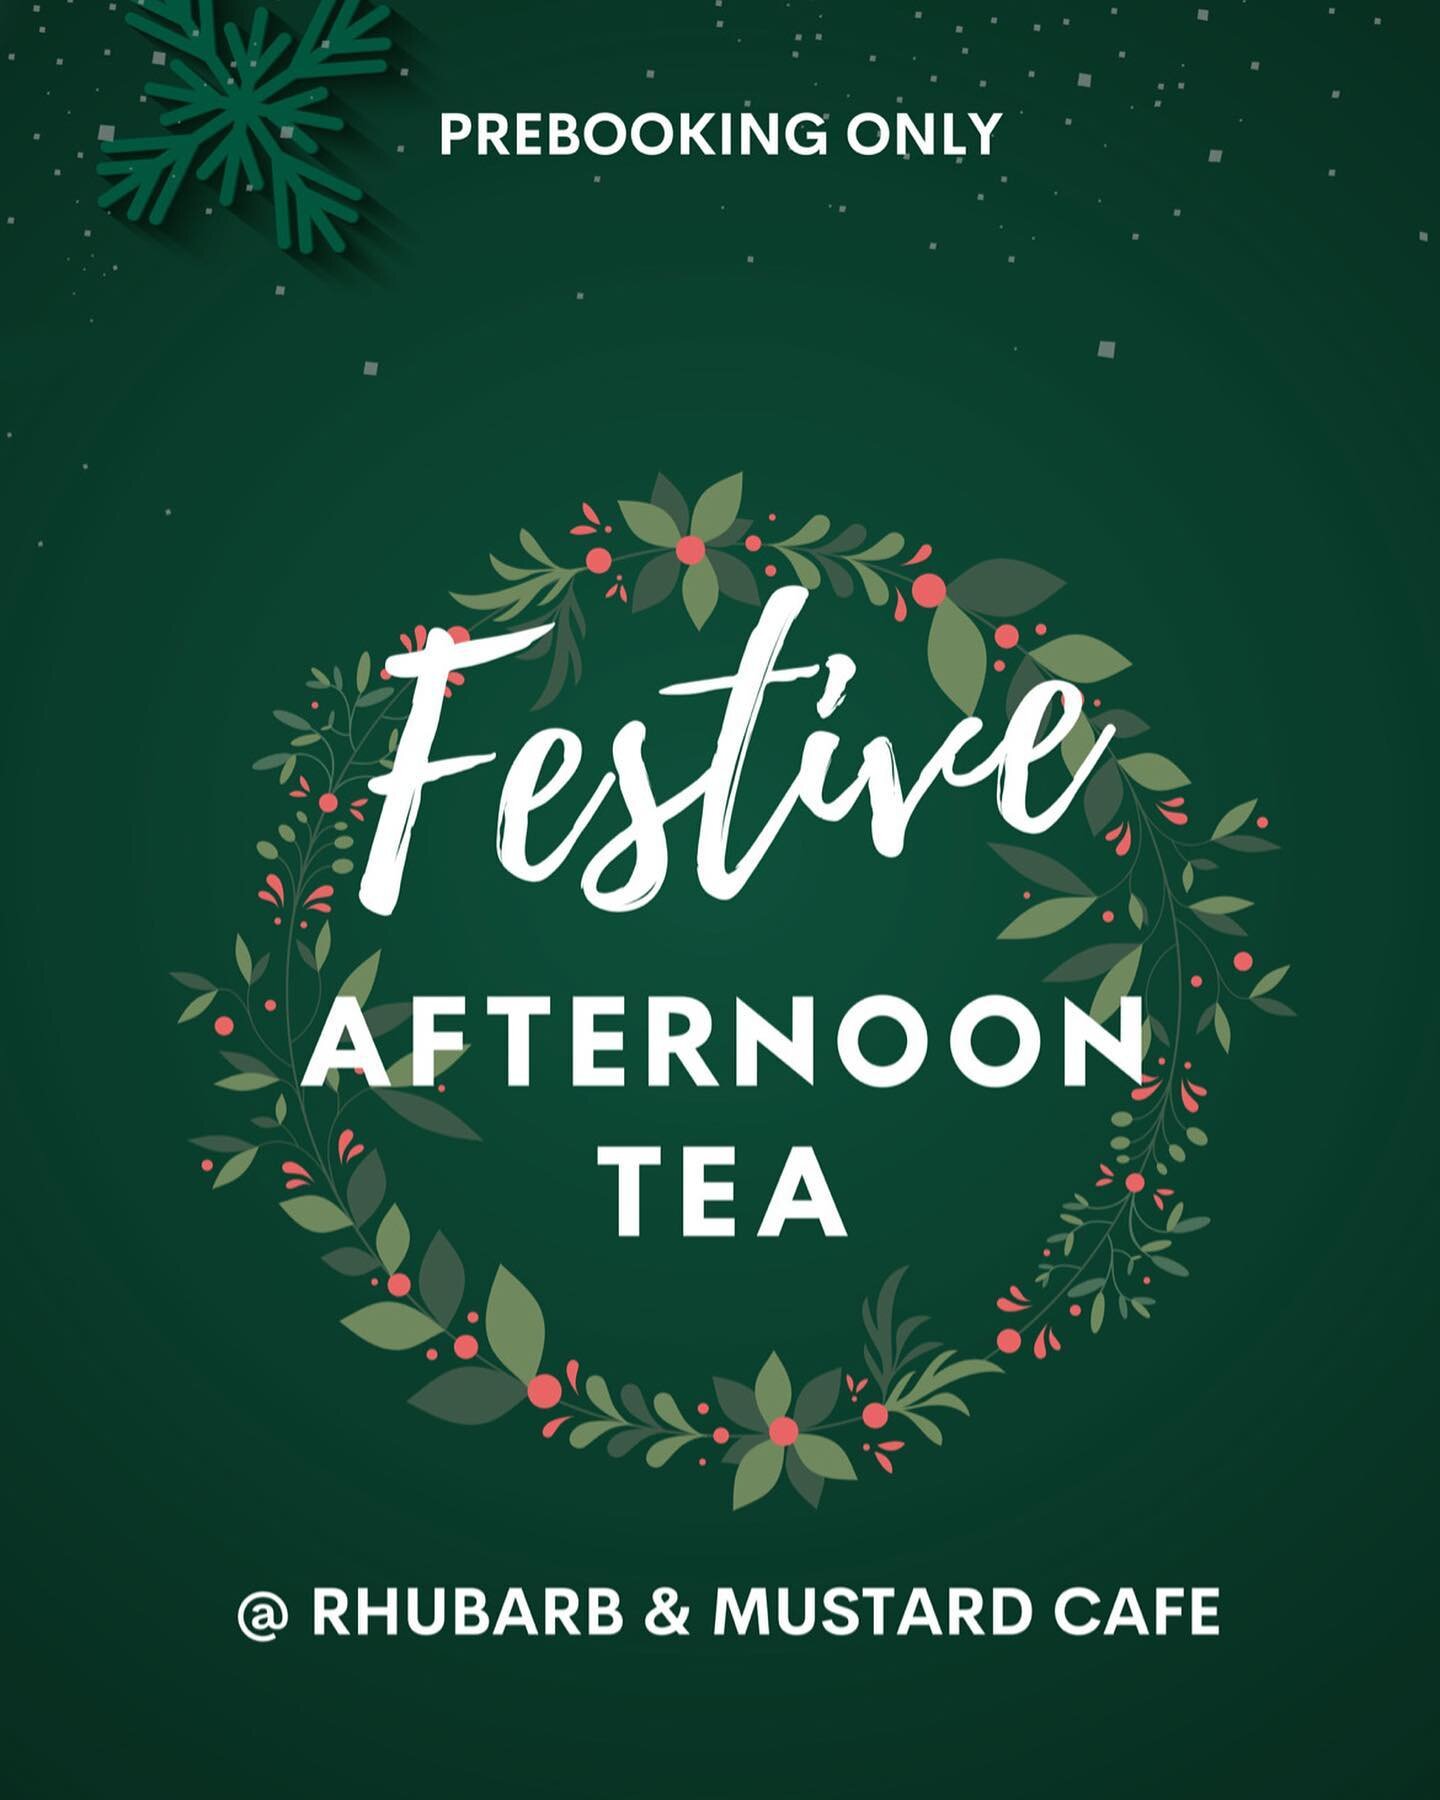 Always save room for dessert&hellip;

Now serving festive afternoon tea @rhubarbandmustard 

&pound;15 per person, pre-booking only! 

Call or message us to book 

#afternoontea #rhubarbandmustard #nuneaton